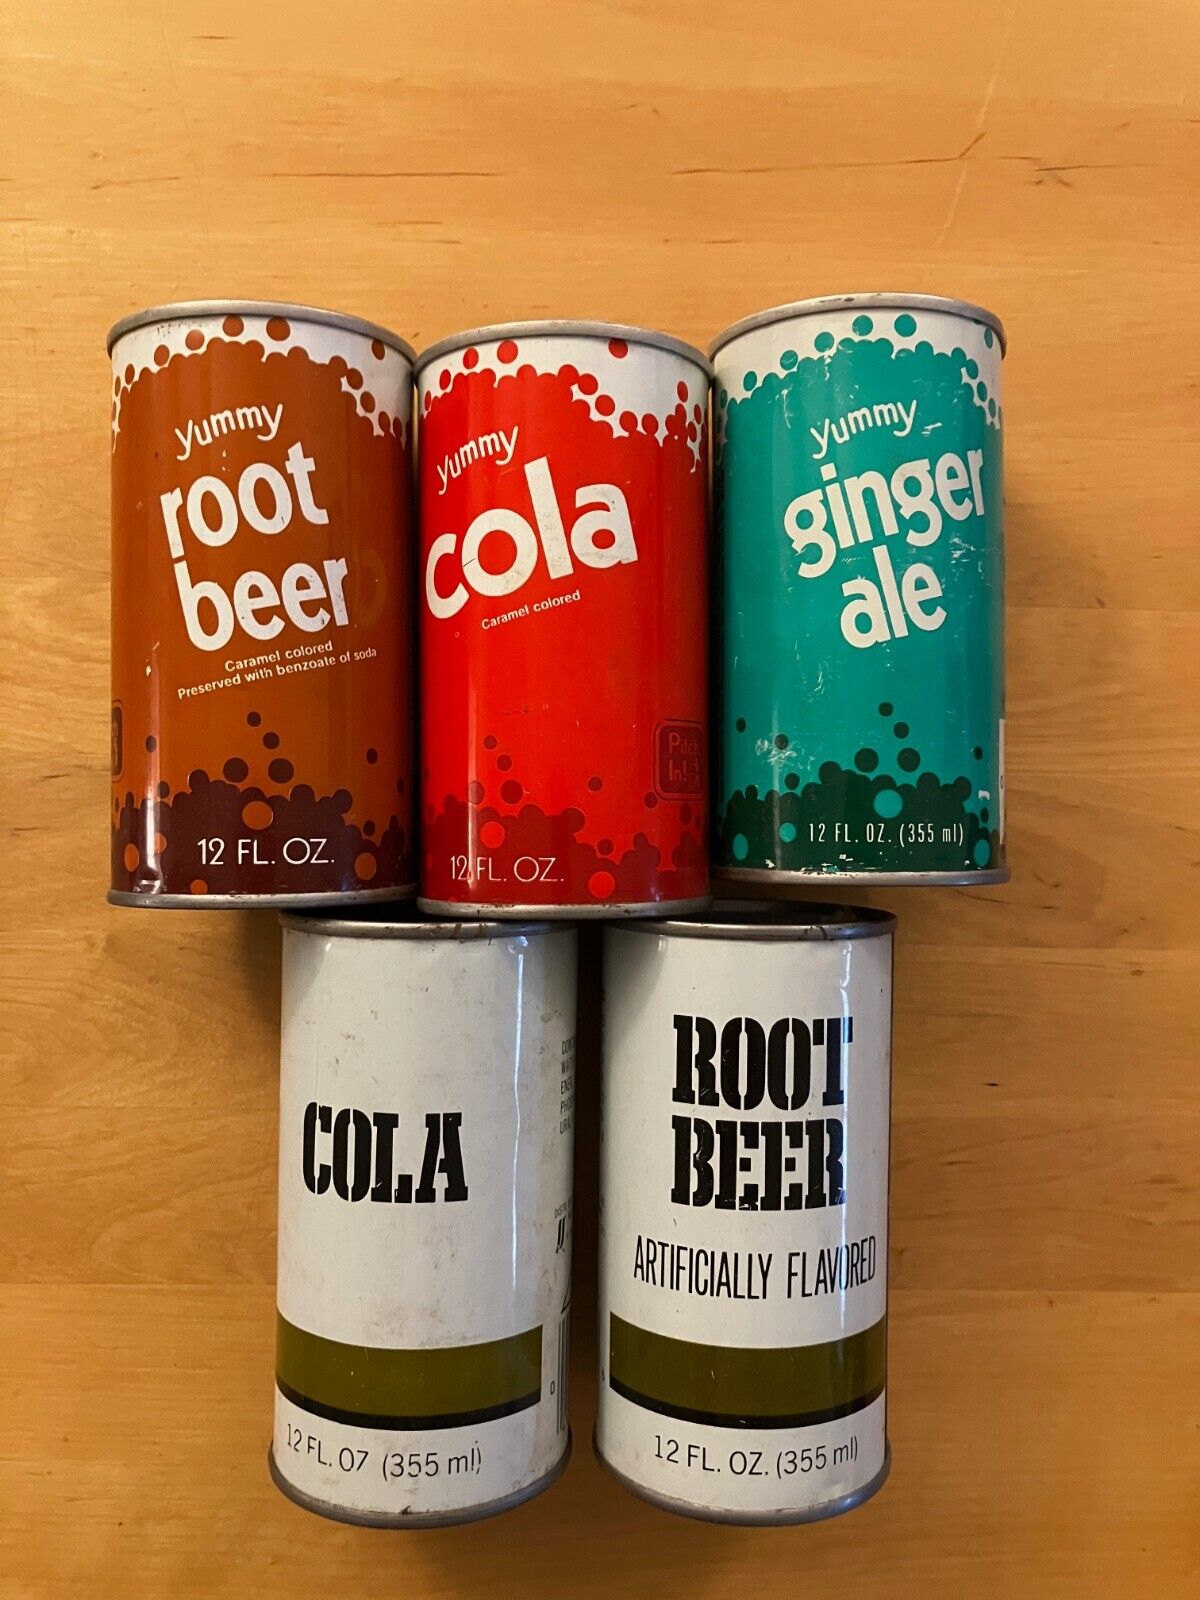 Lot of 5 Generic & Yummy Soda empty cans from Jewel Cola, Root Beer, Ginger Ale